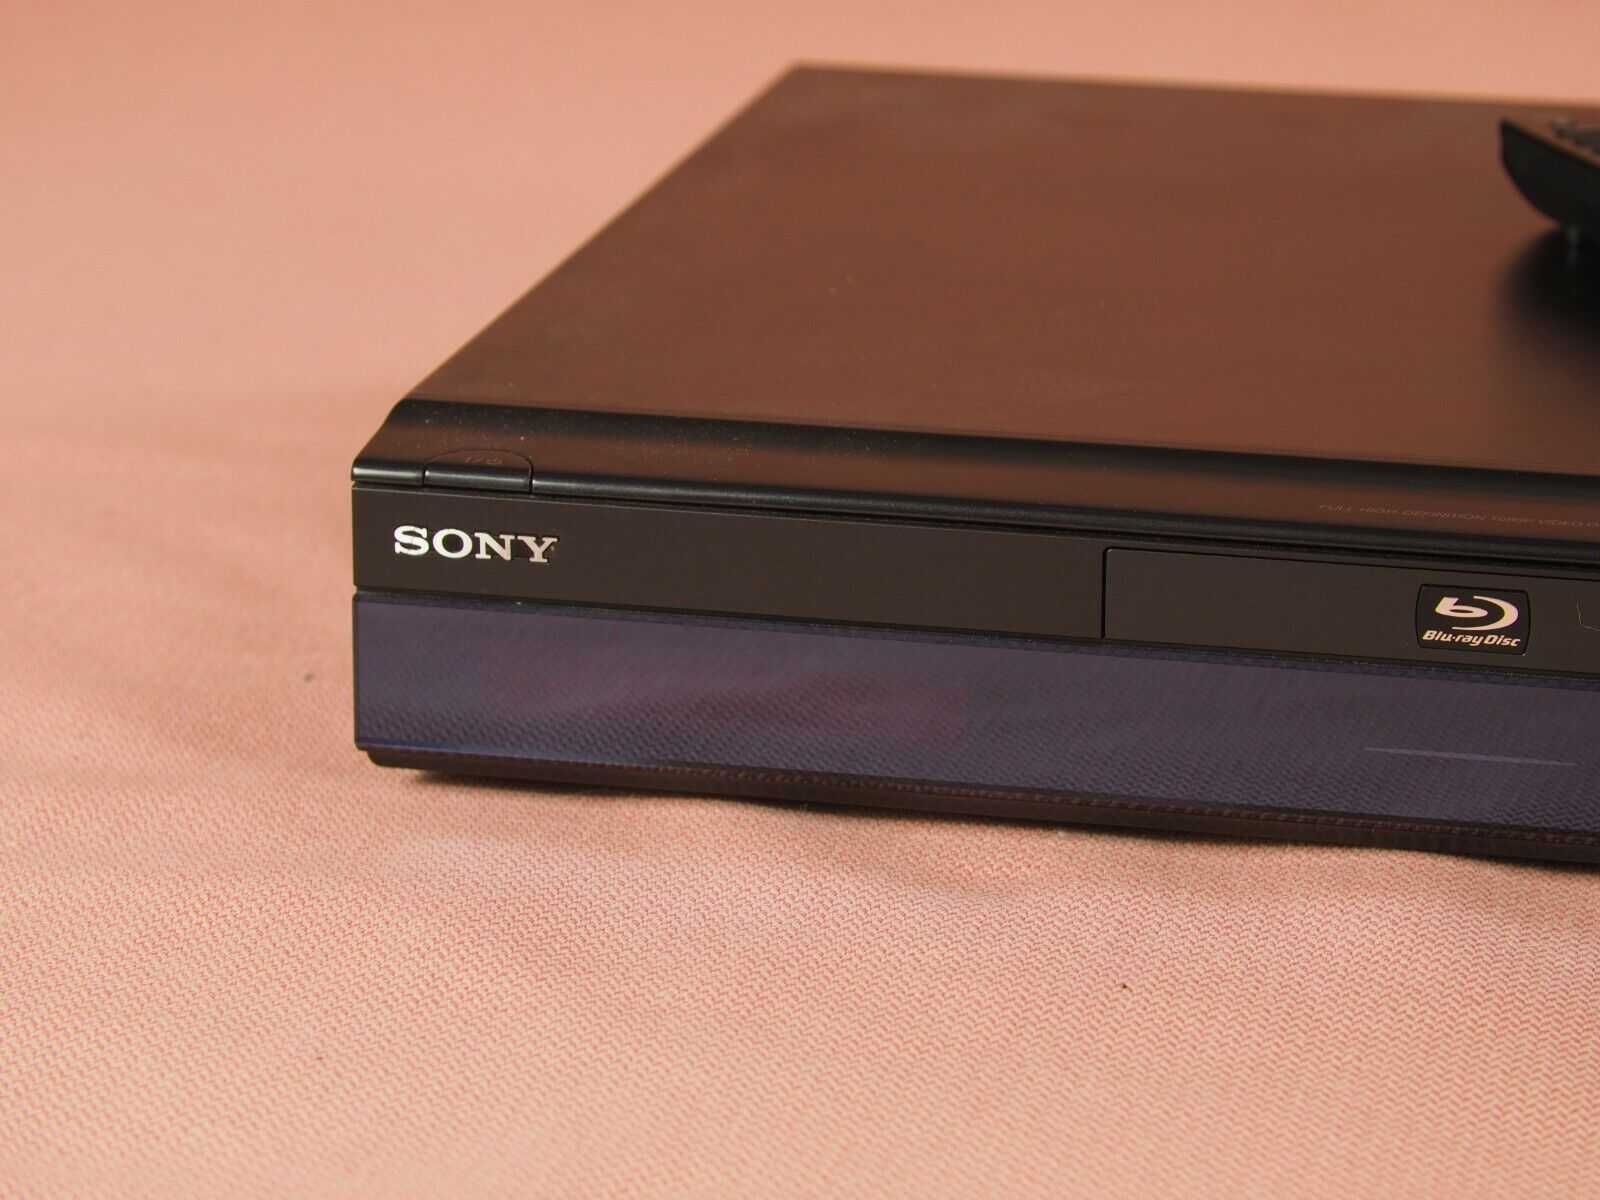 Sony BDP-S300 - Blu-ray disc player